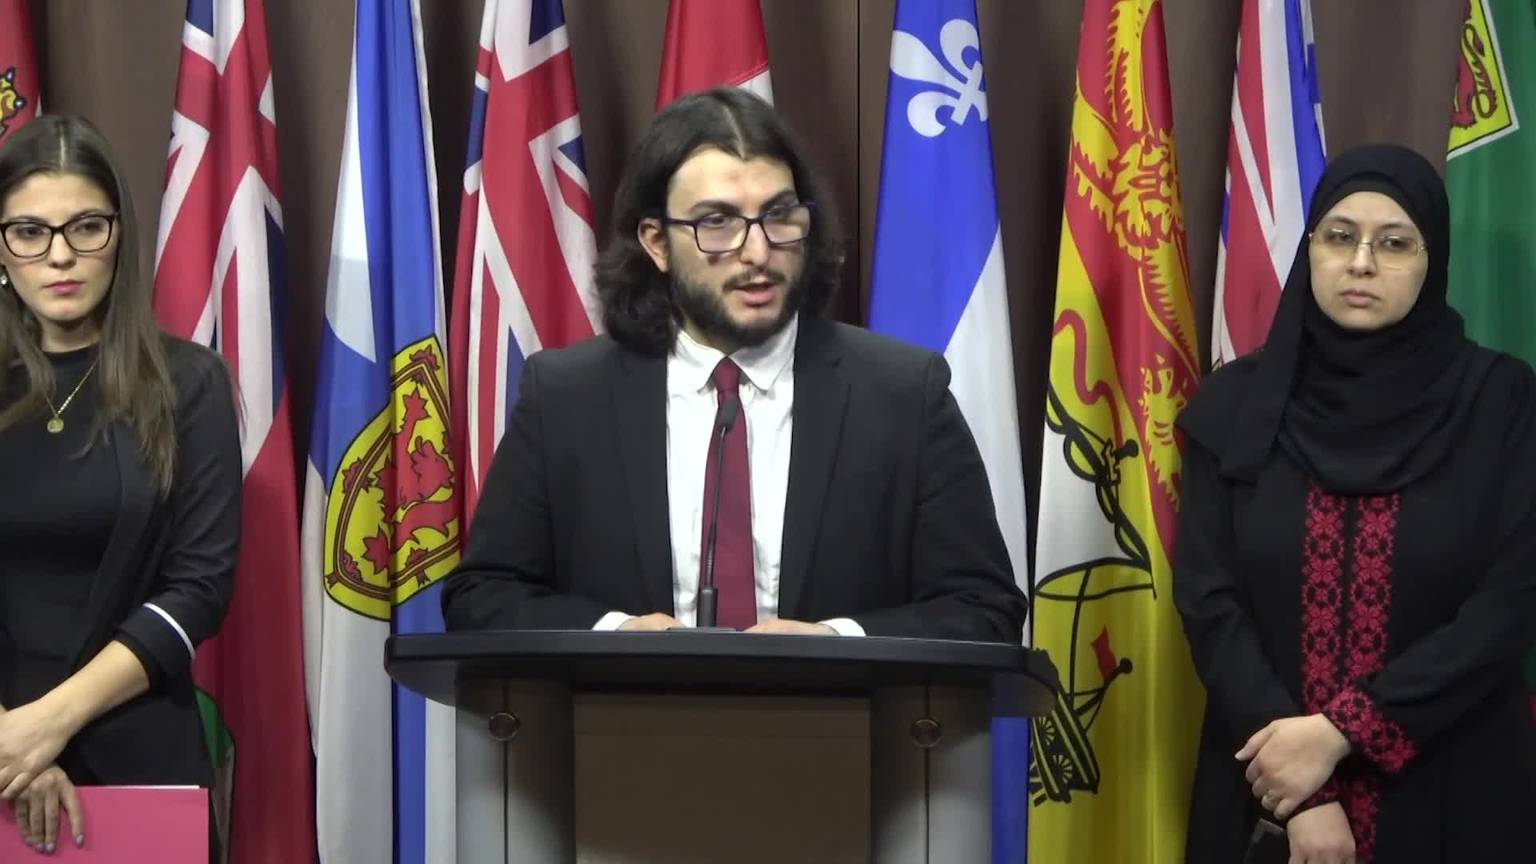 Video: MPs split over NDP motion to recognize Palestine [Video]